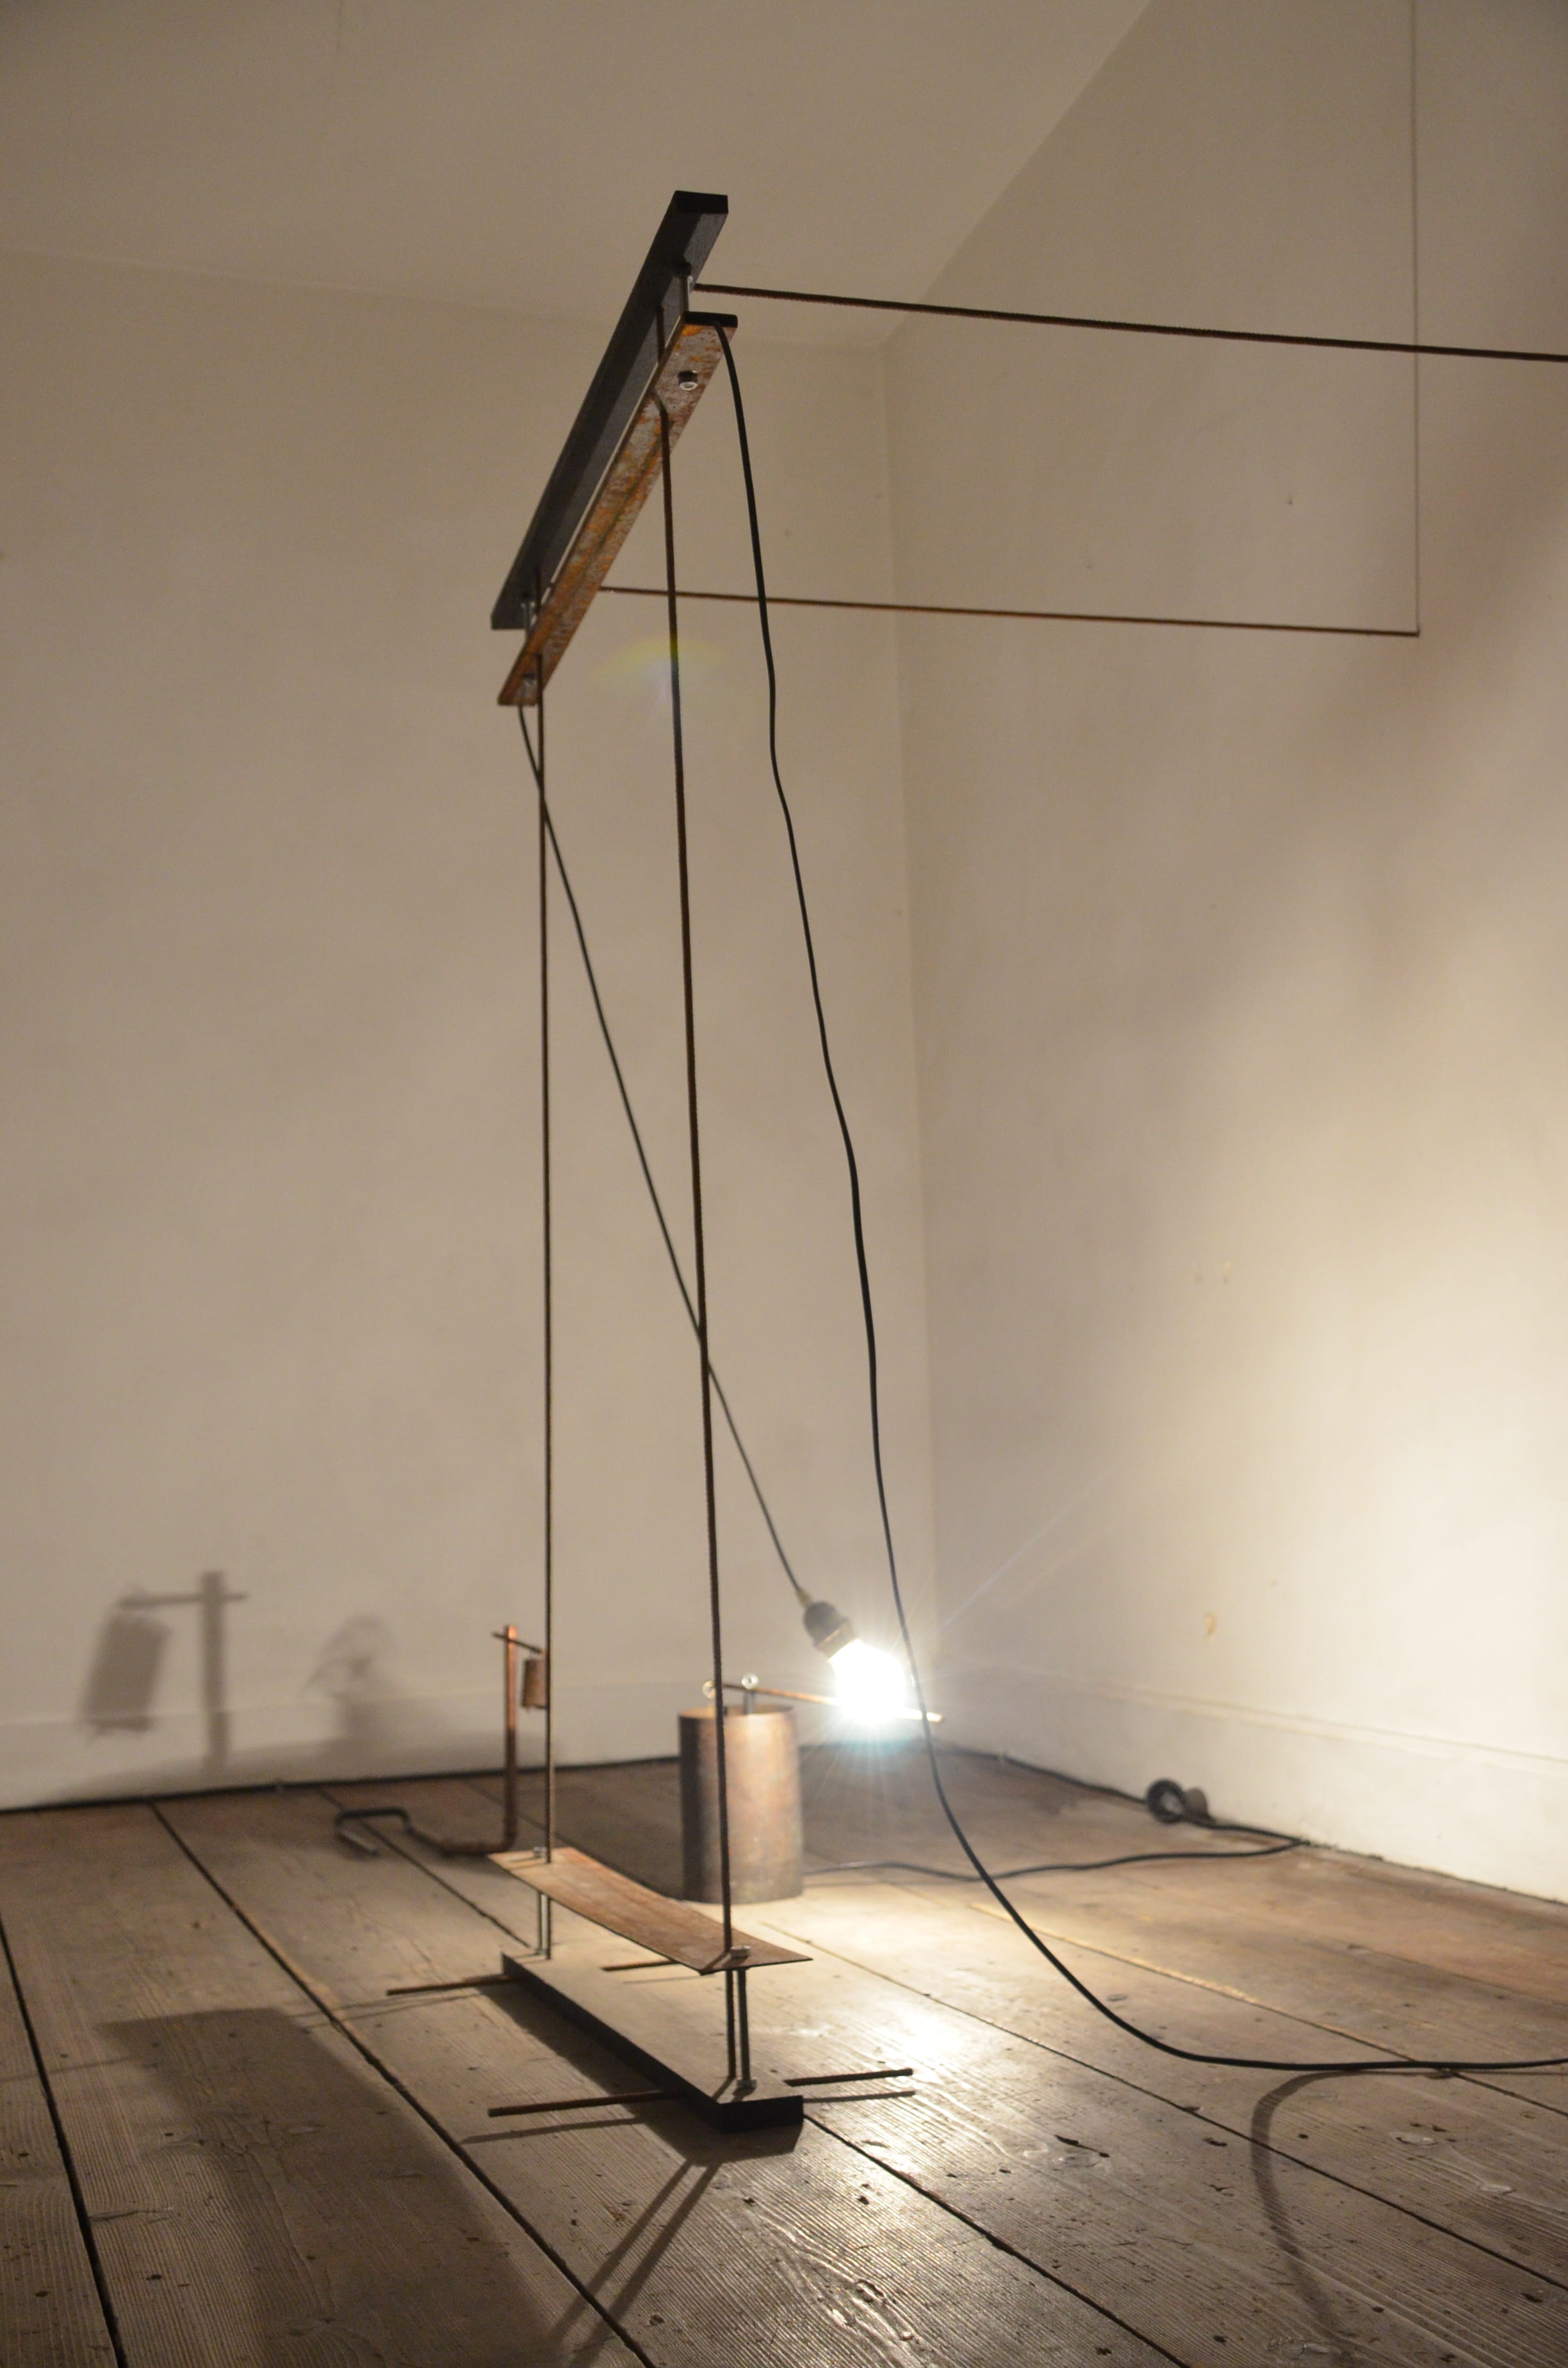 Light Bulb Hanging on a Cable Swinging Right | by Anna Godzina.